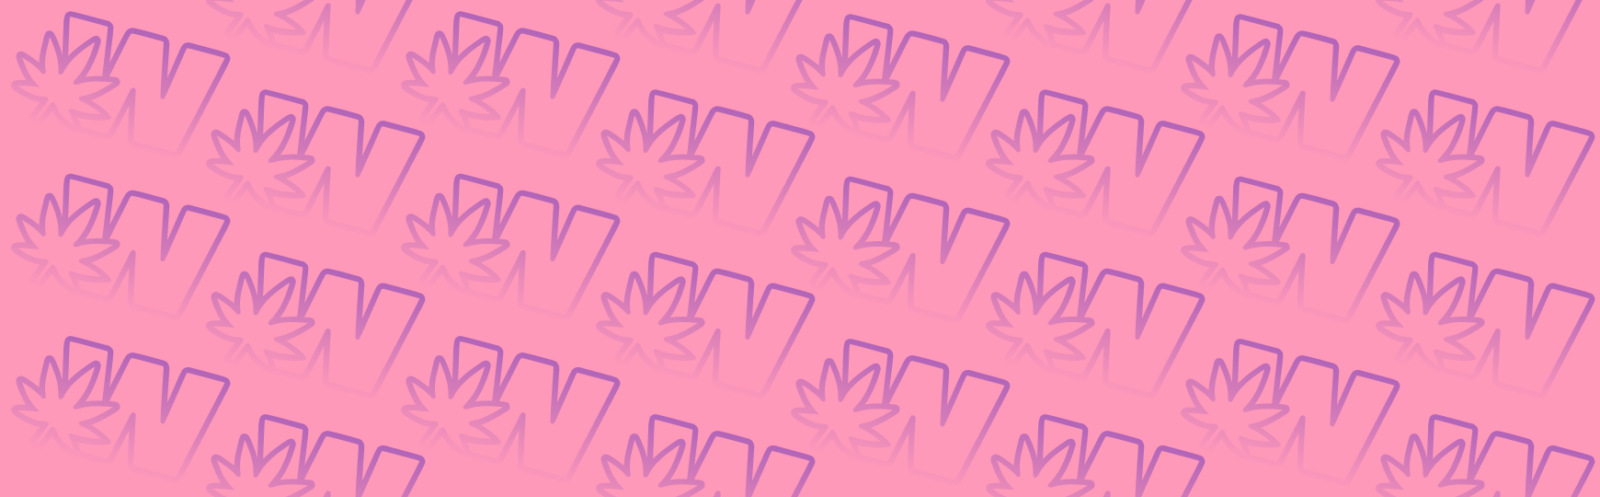 Best Weed Strains for Sex